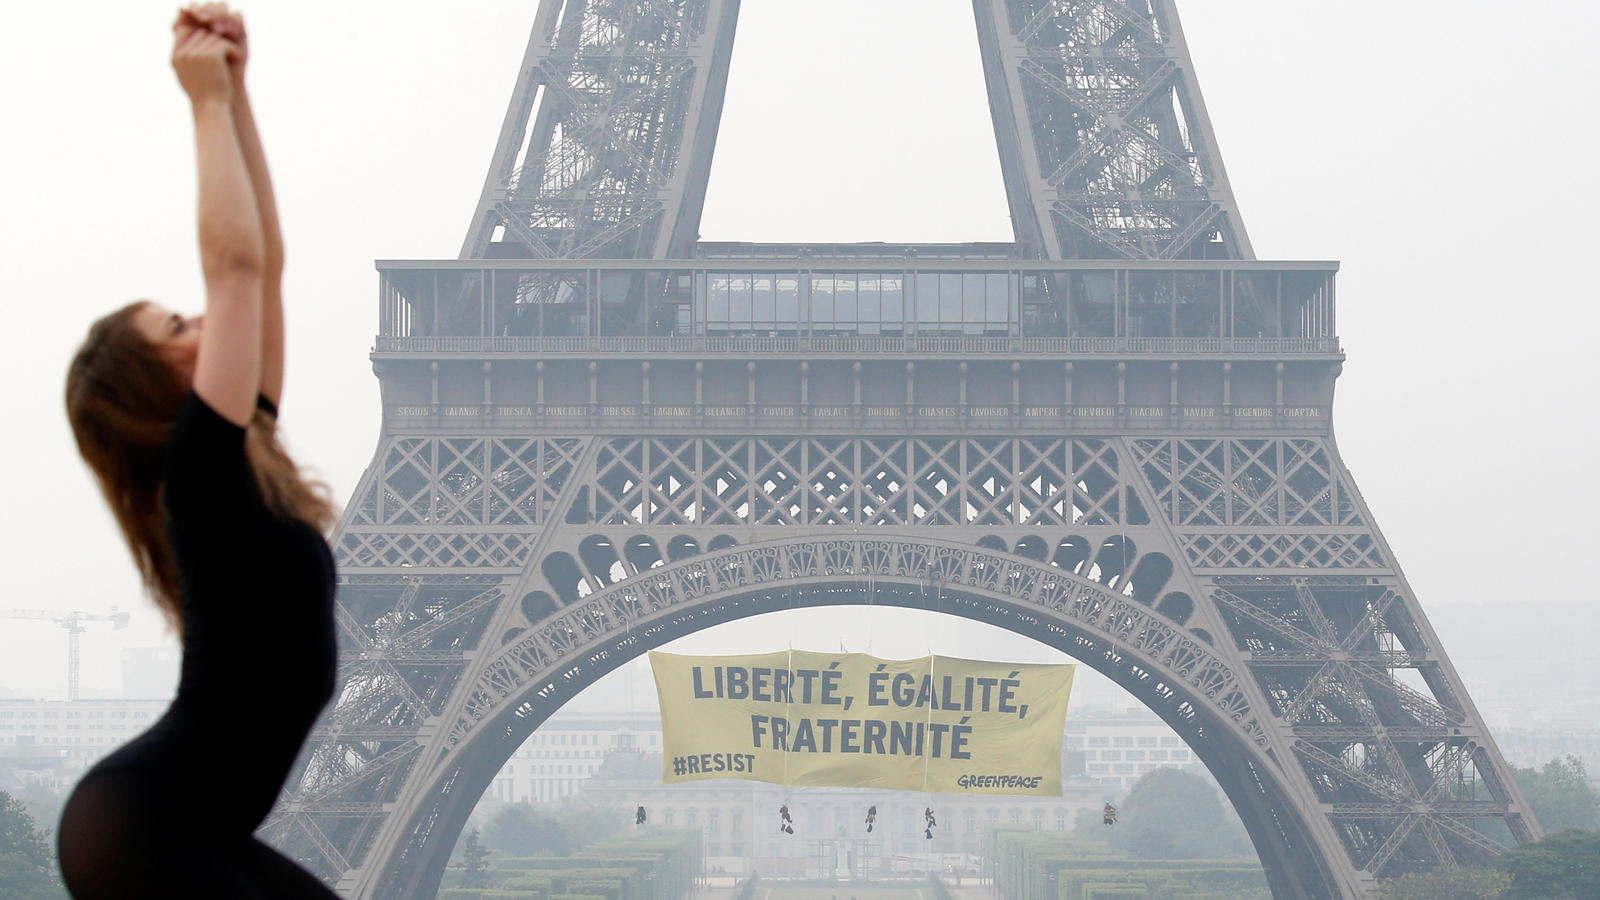 A dancer attends a photo shooting as activists from the environmentalist group Greenpeace unfurl a giant banner on the Eiffel Tower which reads "Liberty, Equality, Fraternity" in a call on French citizens to vote against the National Front (FN) presi